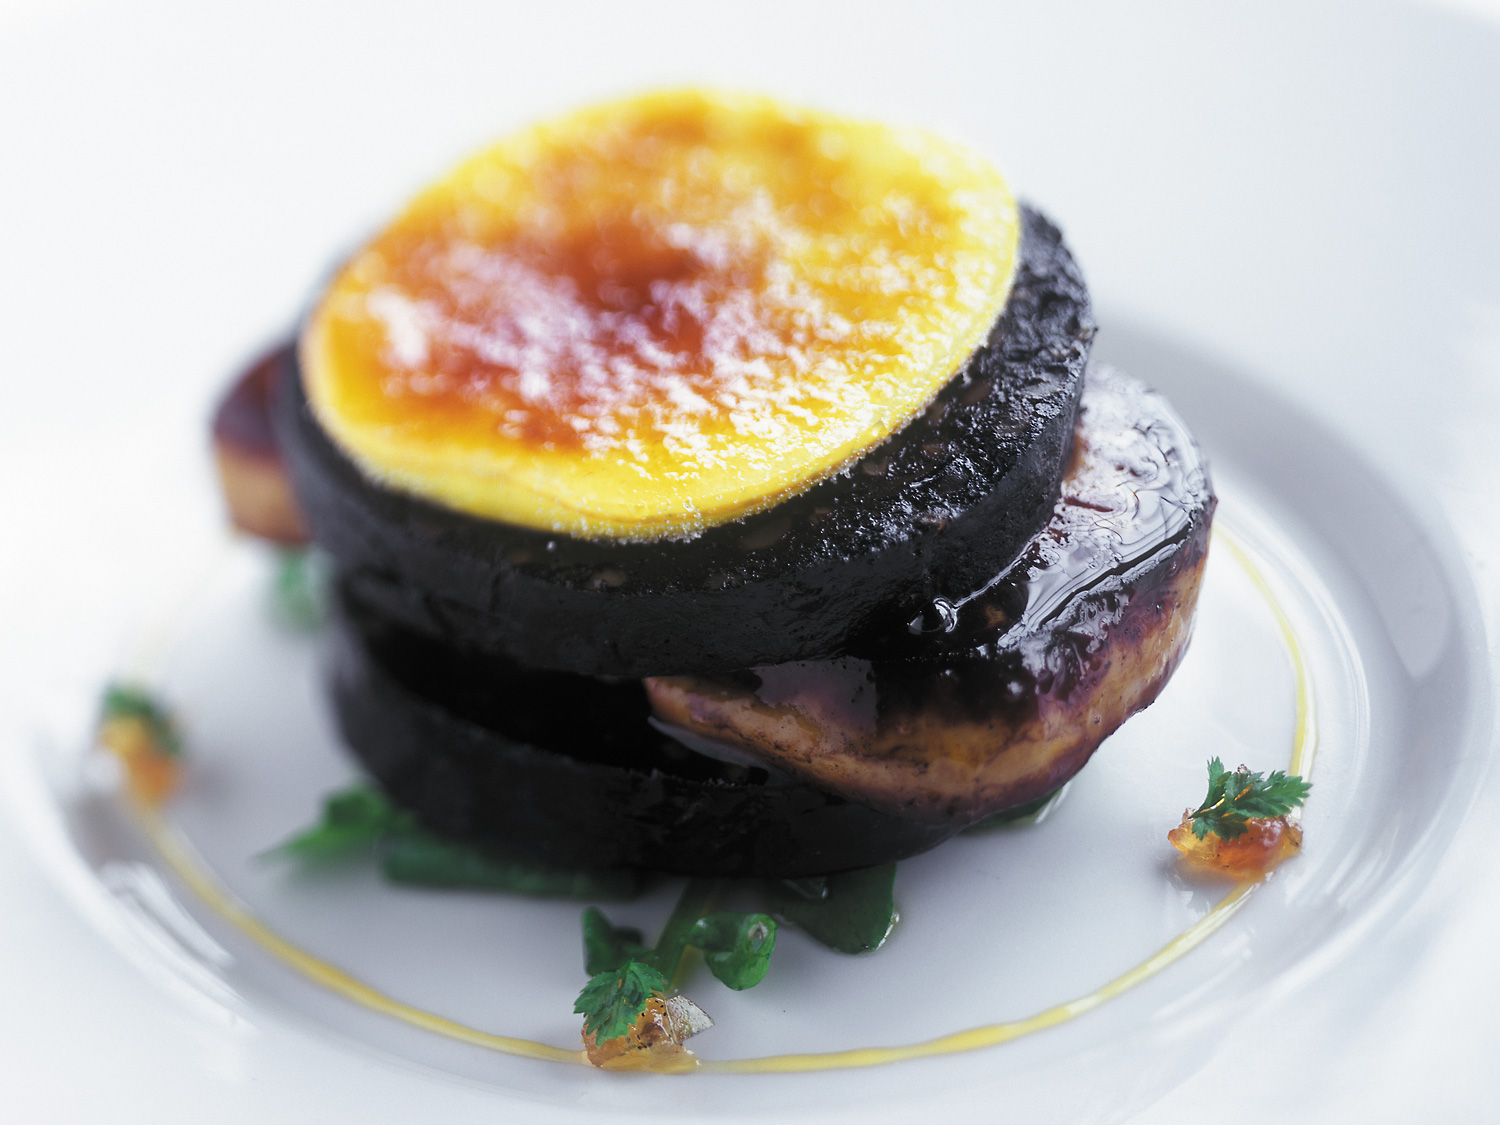 Andrew-pern-black-pudding-and-foie-gras-8.jpg